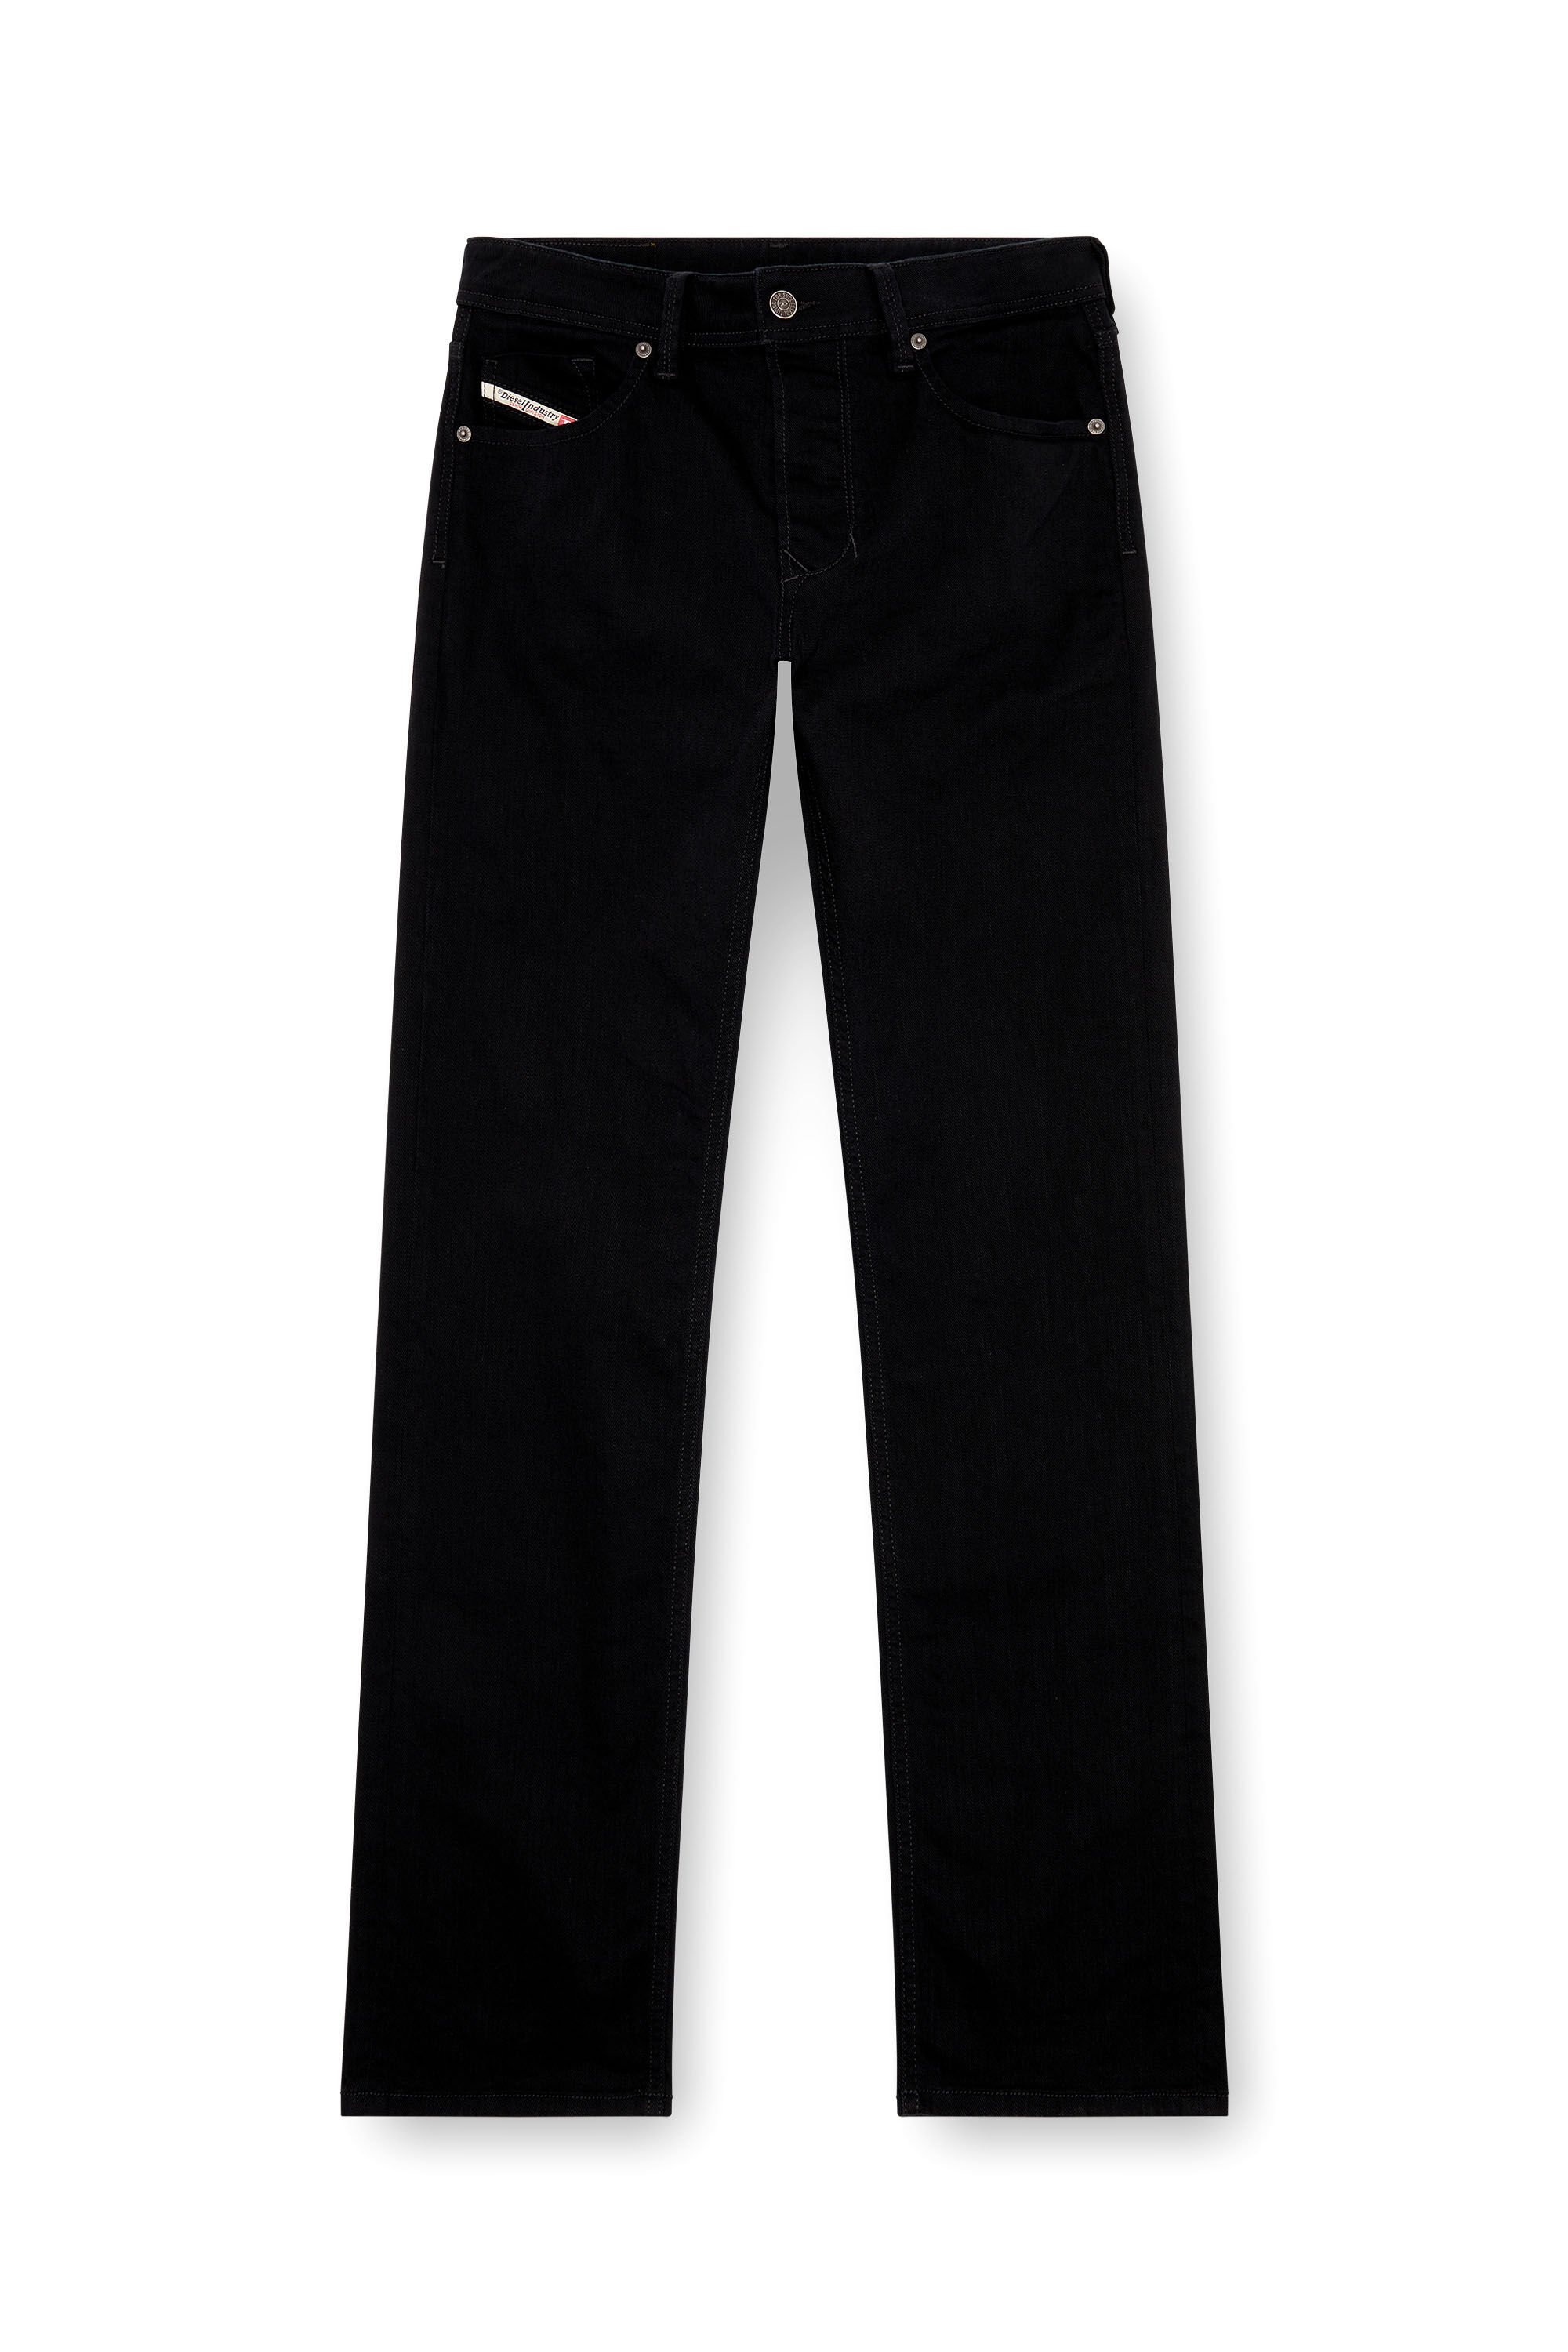 Diesel - Straight Jeans 1985 Larkee 0688H, Hombre Straight Jeans - 1985 Larkee in Negro - Image 2